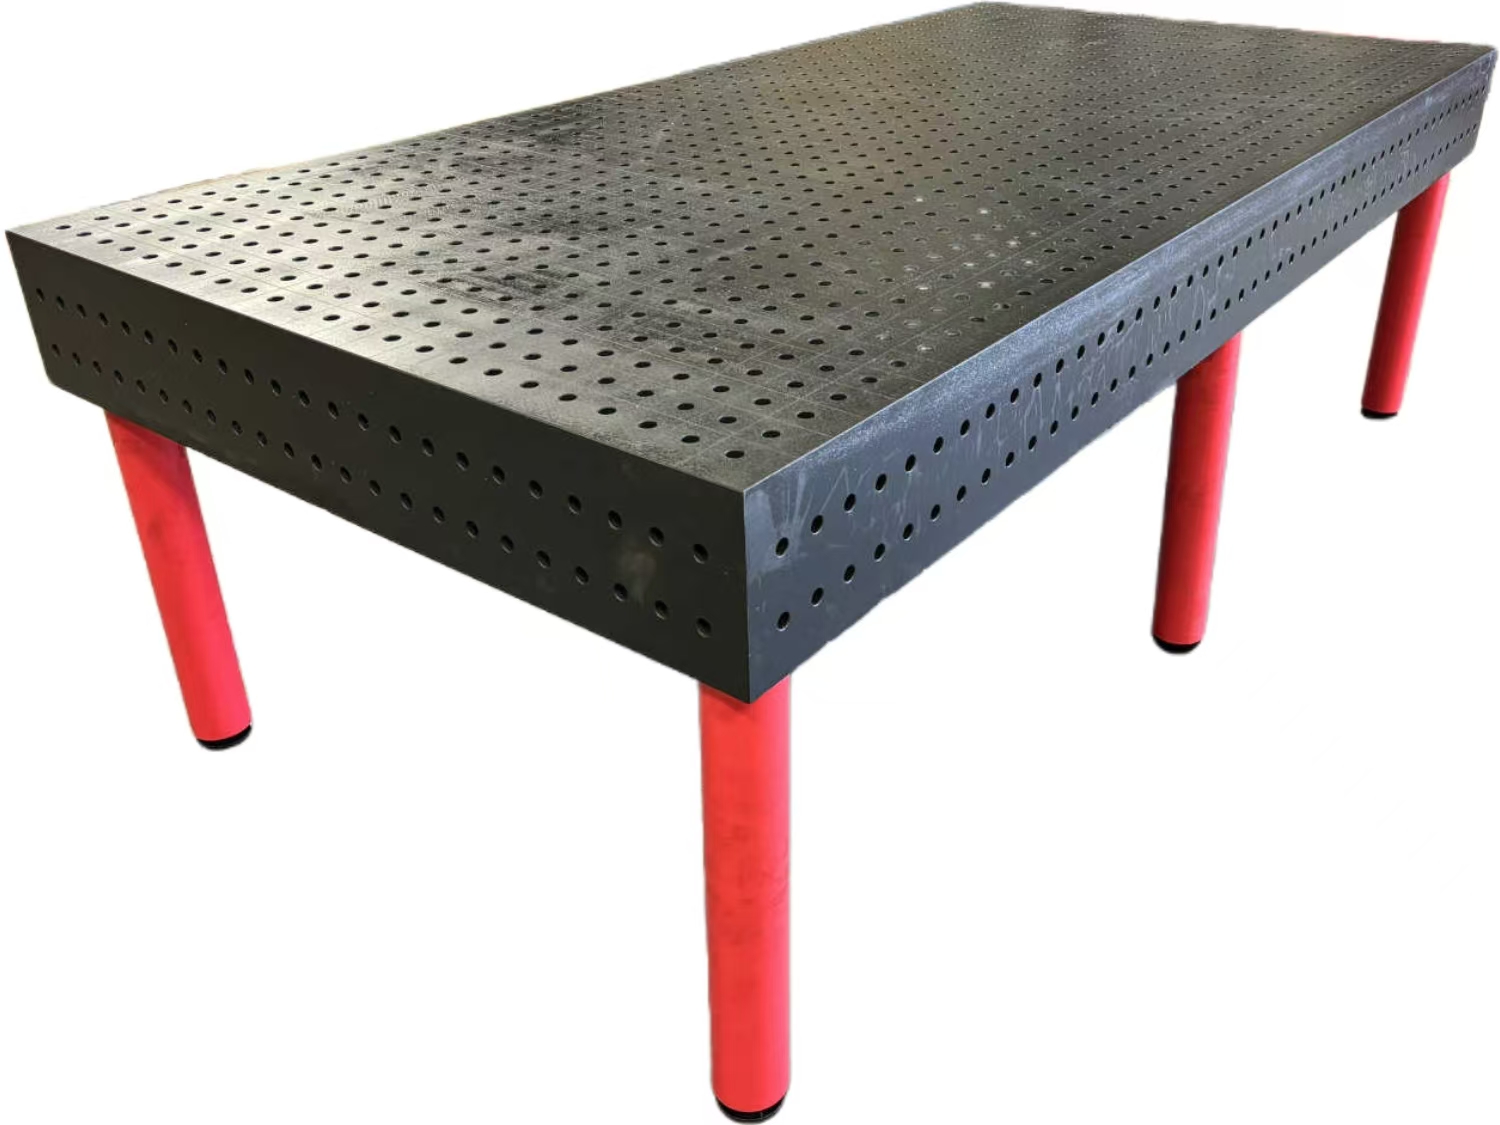 What are the differences between steel welded tables and cast iron welded tables?